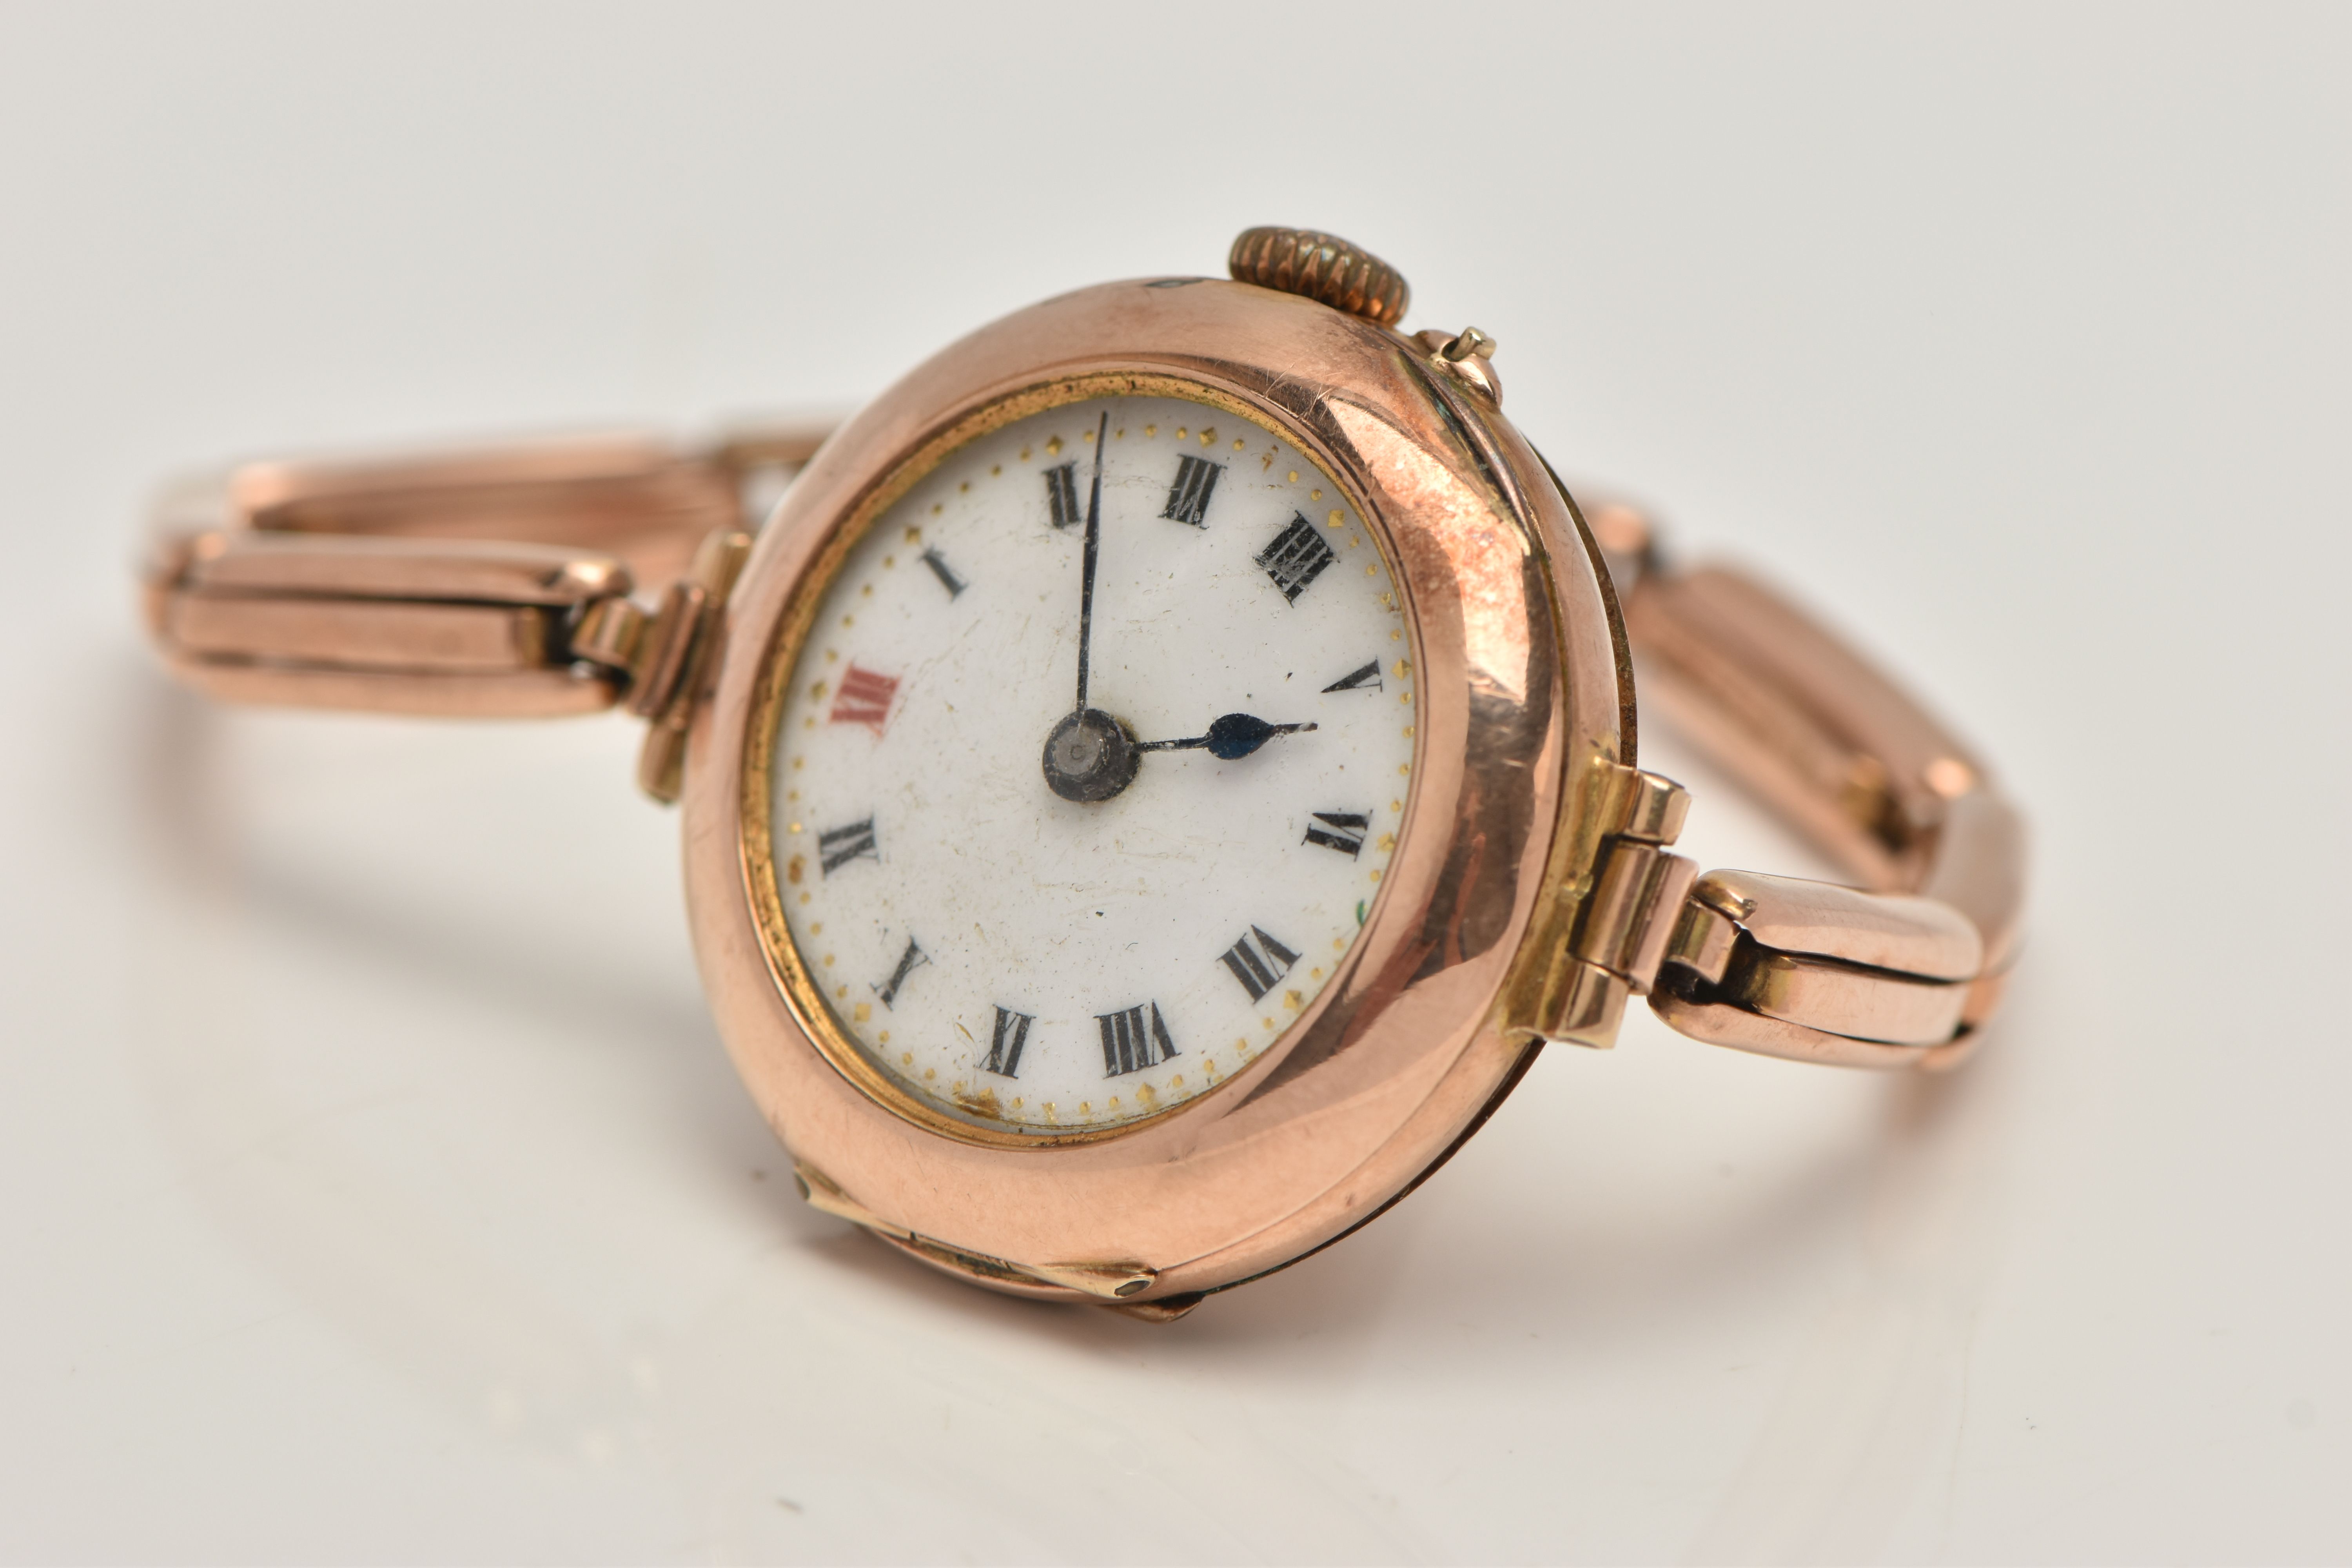 AN EARLY 20TH CENTURY 9CT GOLD LADYS WRISTWATCH, hand wound movement, round dial, Roman numerals, - Image 2 of 6